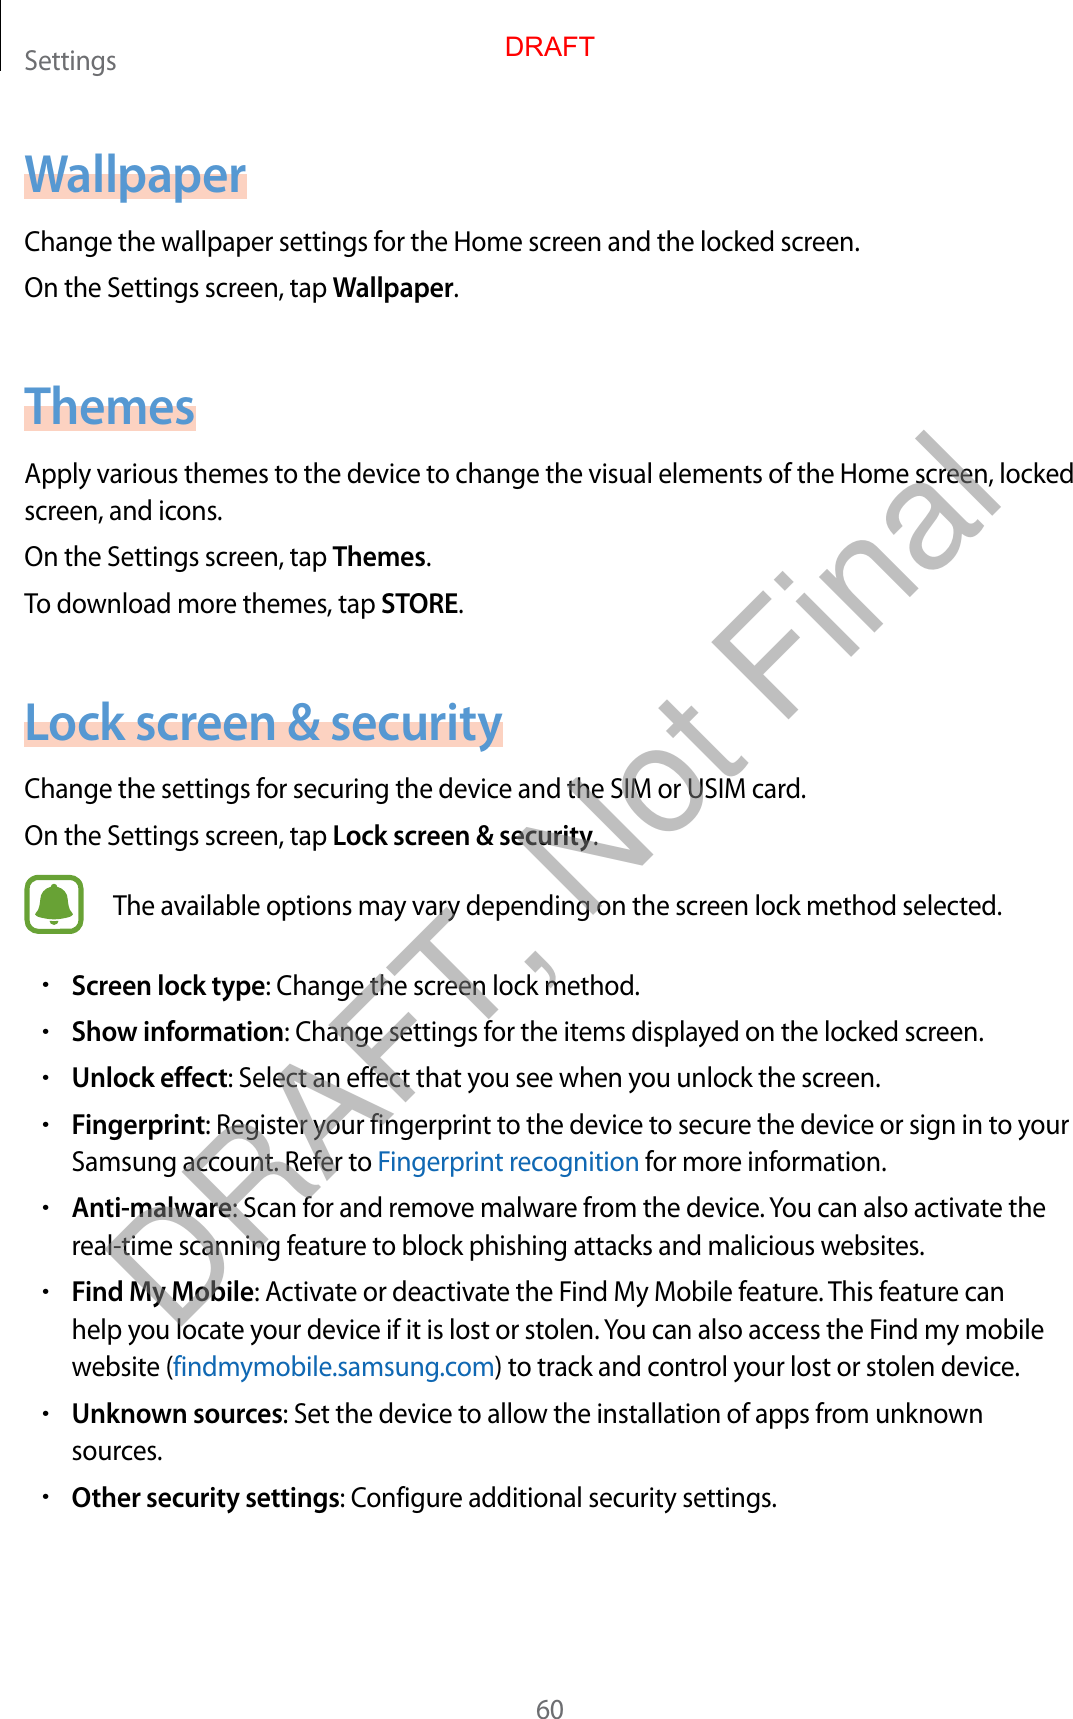 Settings60WallpaperChange the wallpaper settings for the Home screen and the locked screen.On the Settings screen, tap Wallpaper.ThemesApply various themes to the device to change the visual elements of the Home screen, locked screen, and icons.On the Settings screen, tap Themes.To download more themes, tap STORE.Lock screen &amp; securityChange the settings for securing the device and the SIM or USIM card.On the Settings screen, tap Lock screen &amp; security.The available options may vary depending on the screen lock method selected.•Screen lock type: Change the screen lock method.•Show information: Change settings for the items displayed on the locked screen.•Unlock effect: Select an effect that you see when you unlock the screen.•Fingerprint: Register your fingerprint to the device to secure the device or sign in to your Samsung account. Refer to Fingerprint recognition for more information.•Anti-malware: Scan for and remove malware from the device. You can also activate the real-time scanning feature to block phishing attacks and malicious websites.•Find My Mobile: Activate or deactivate the Find My Mobile feature. This feature can help you locate your device if it is lost or stolen. You can also access the Find my mobile website (findmymobile.samsung.com) to track and control your lost or stolen device.•Unknown sources: Set the device to allow the installation of apps from unknown sources.•Other security settings: Configure additional security settings.DRAFTDRAFT, Not Final